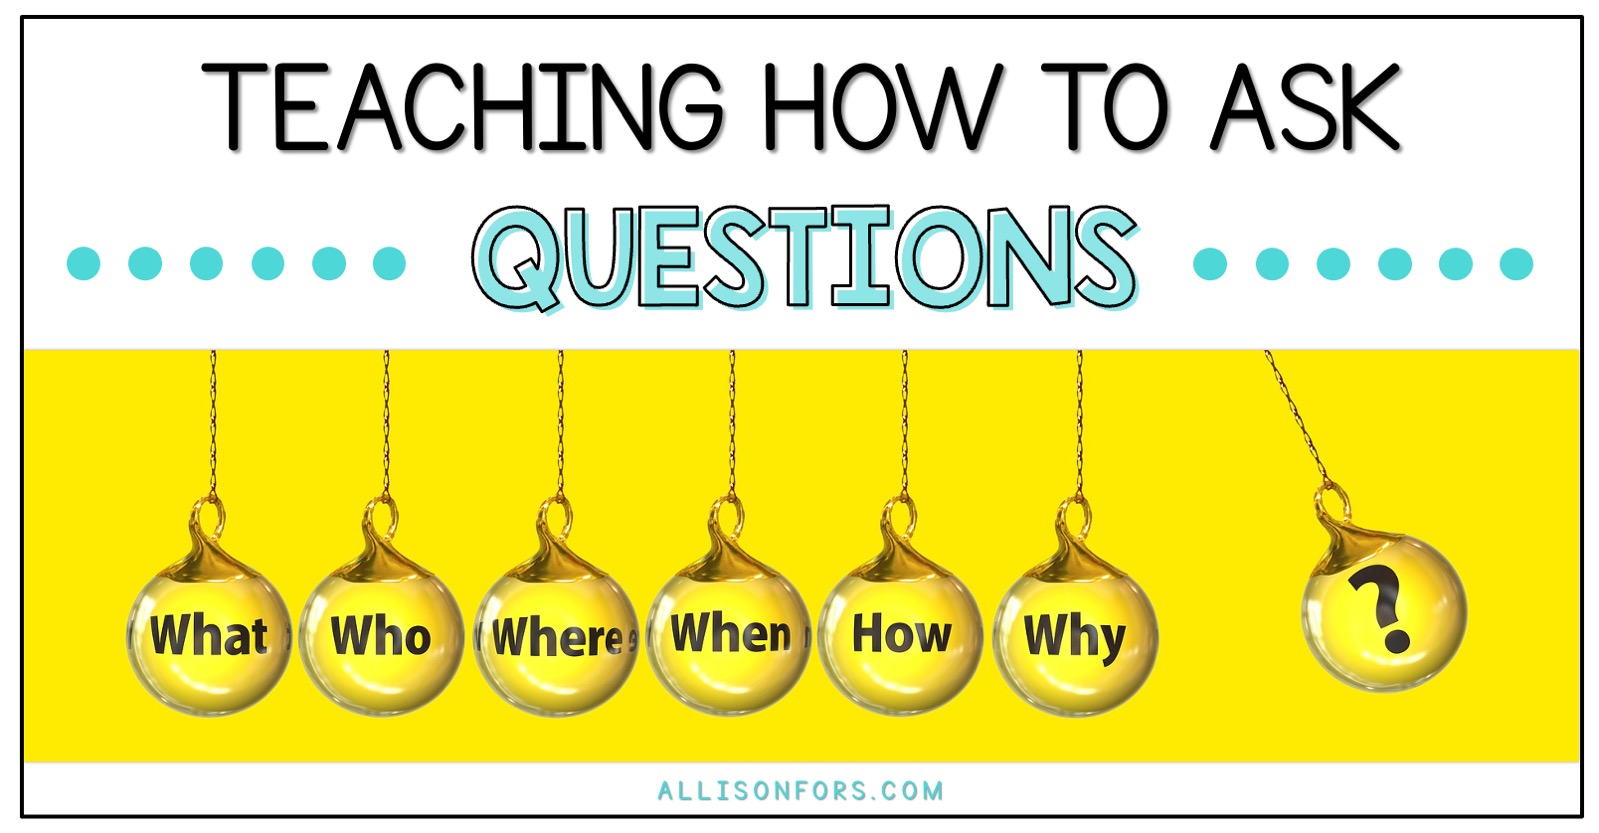 Teaching How to Formulate and Ask Questions